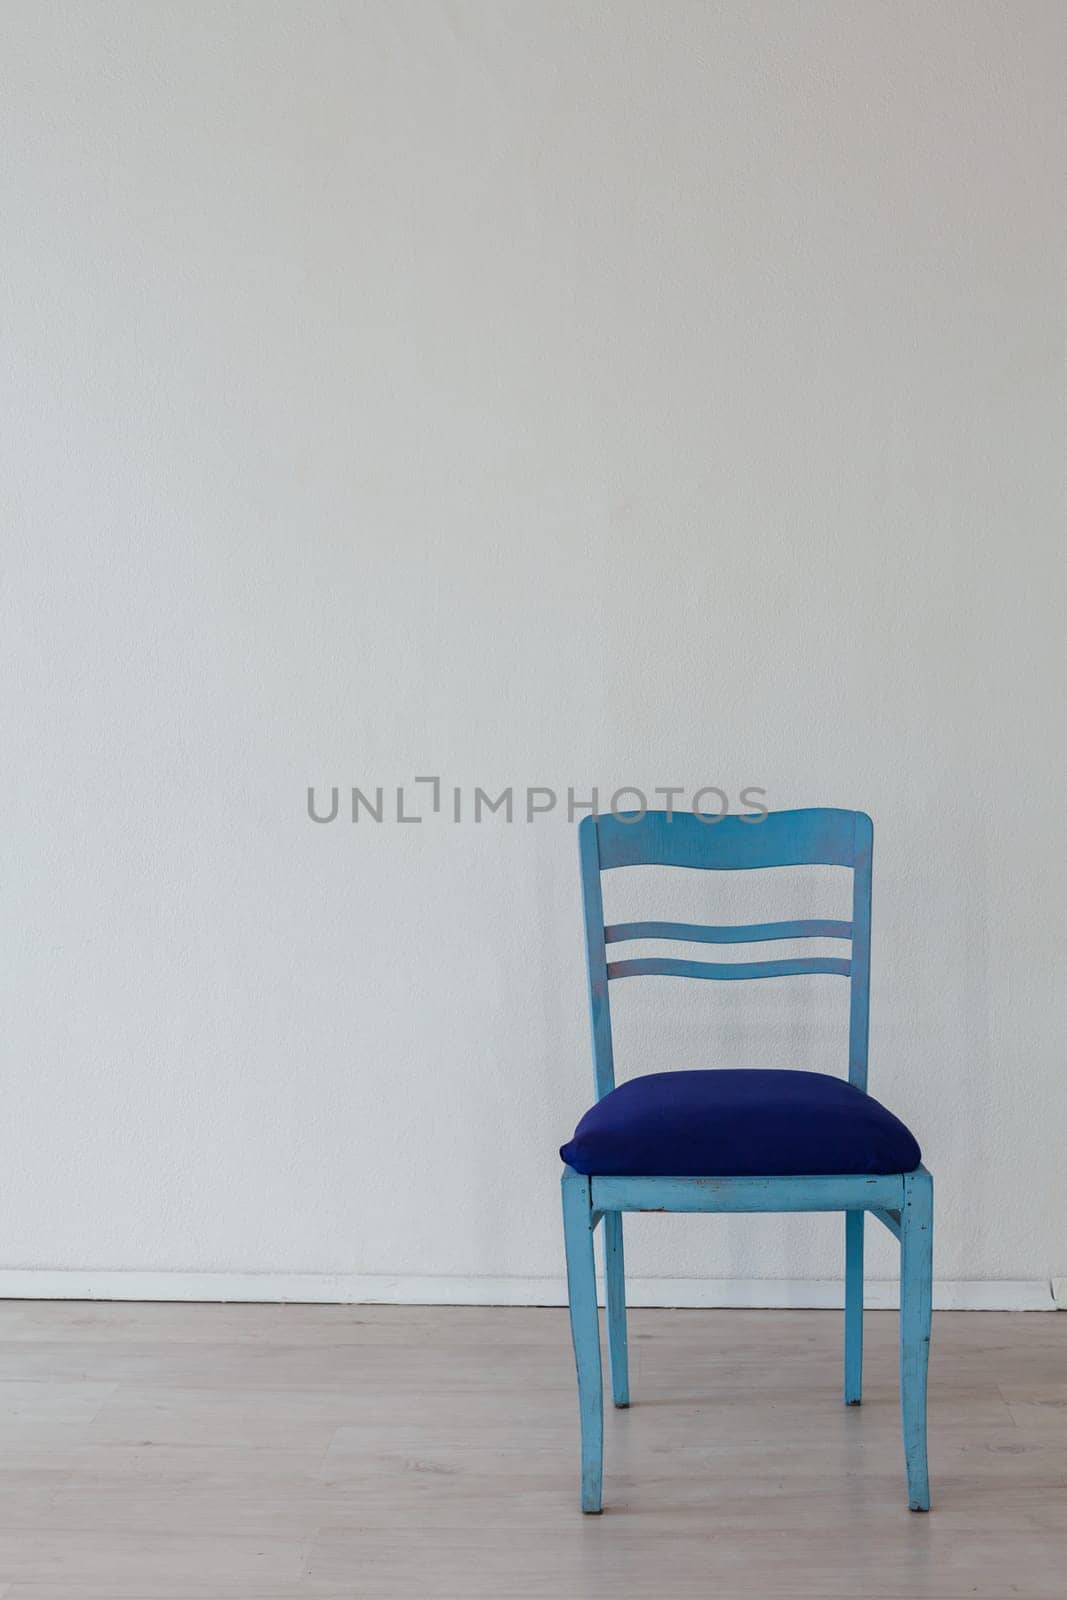 one chair in the interior of an empty white room by Simakov